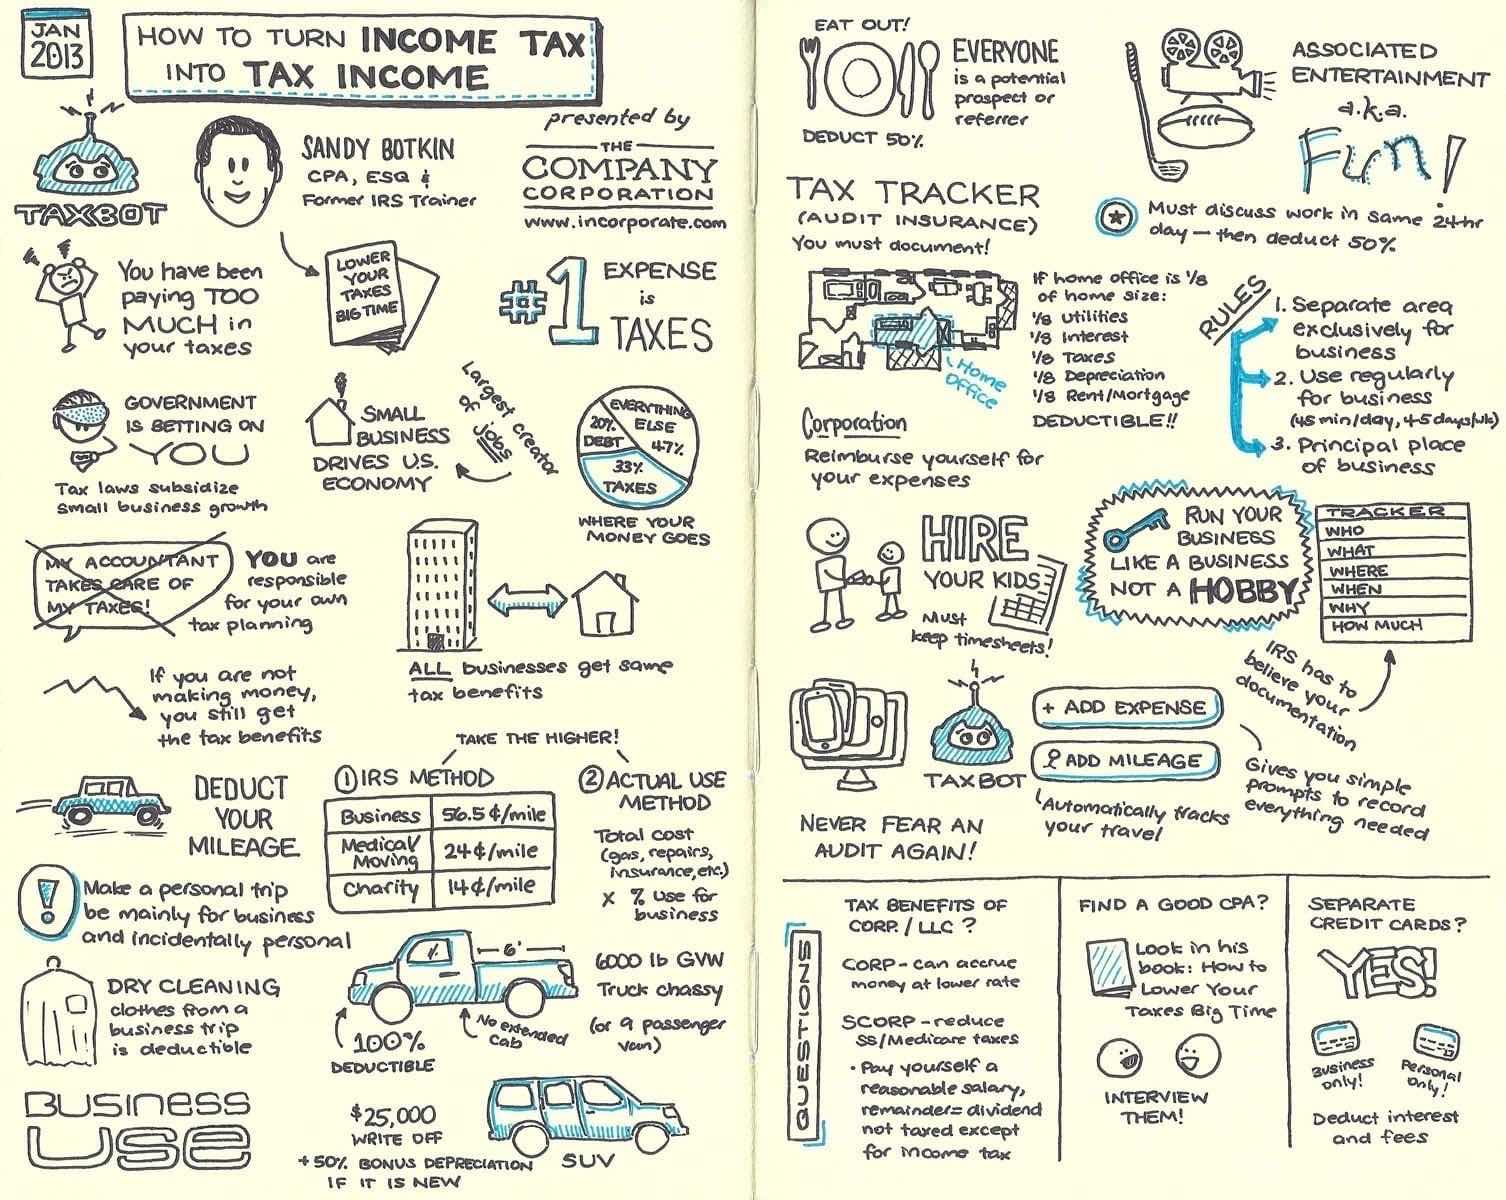 Sketchnotes for webinar by Incorporate.com and Taxbot